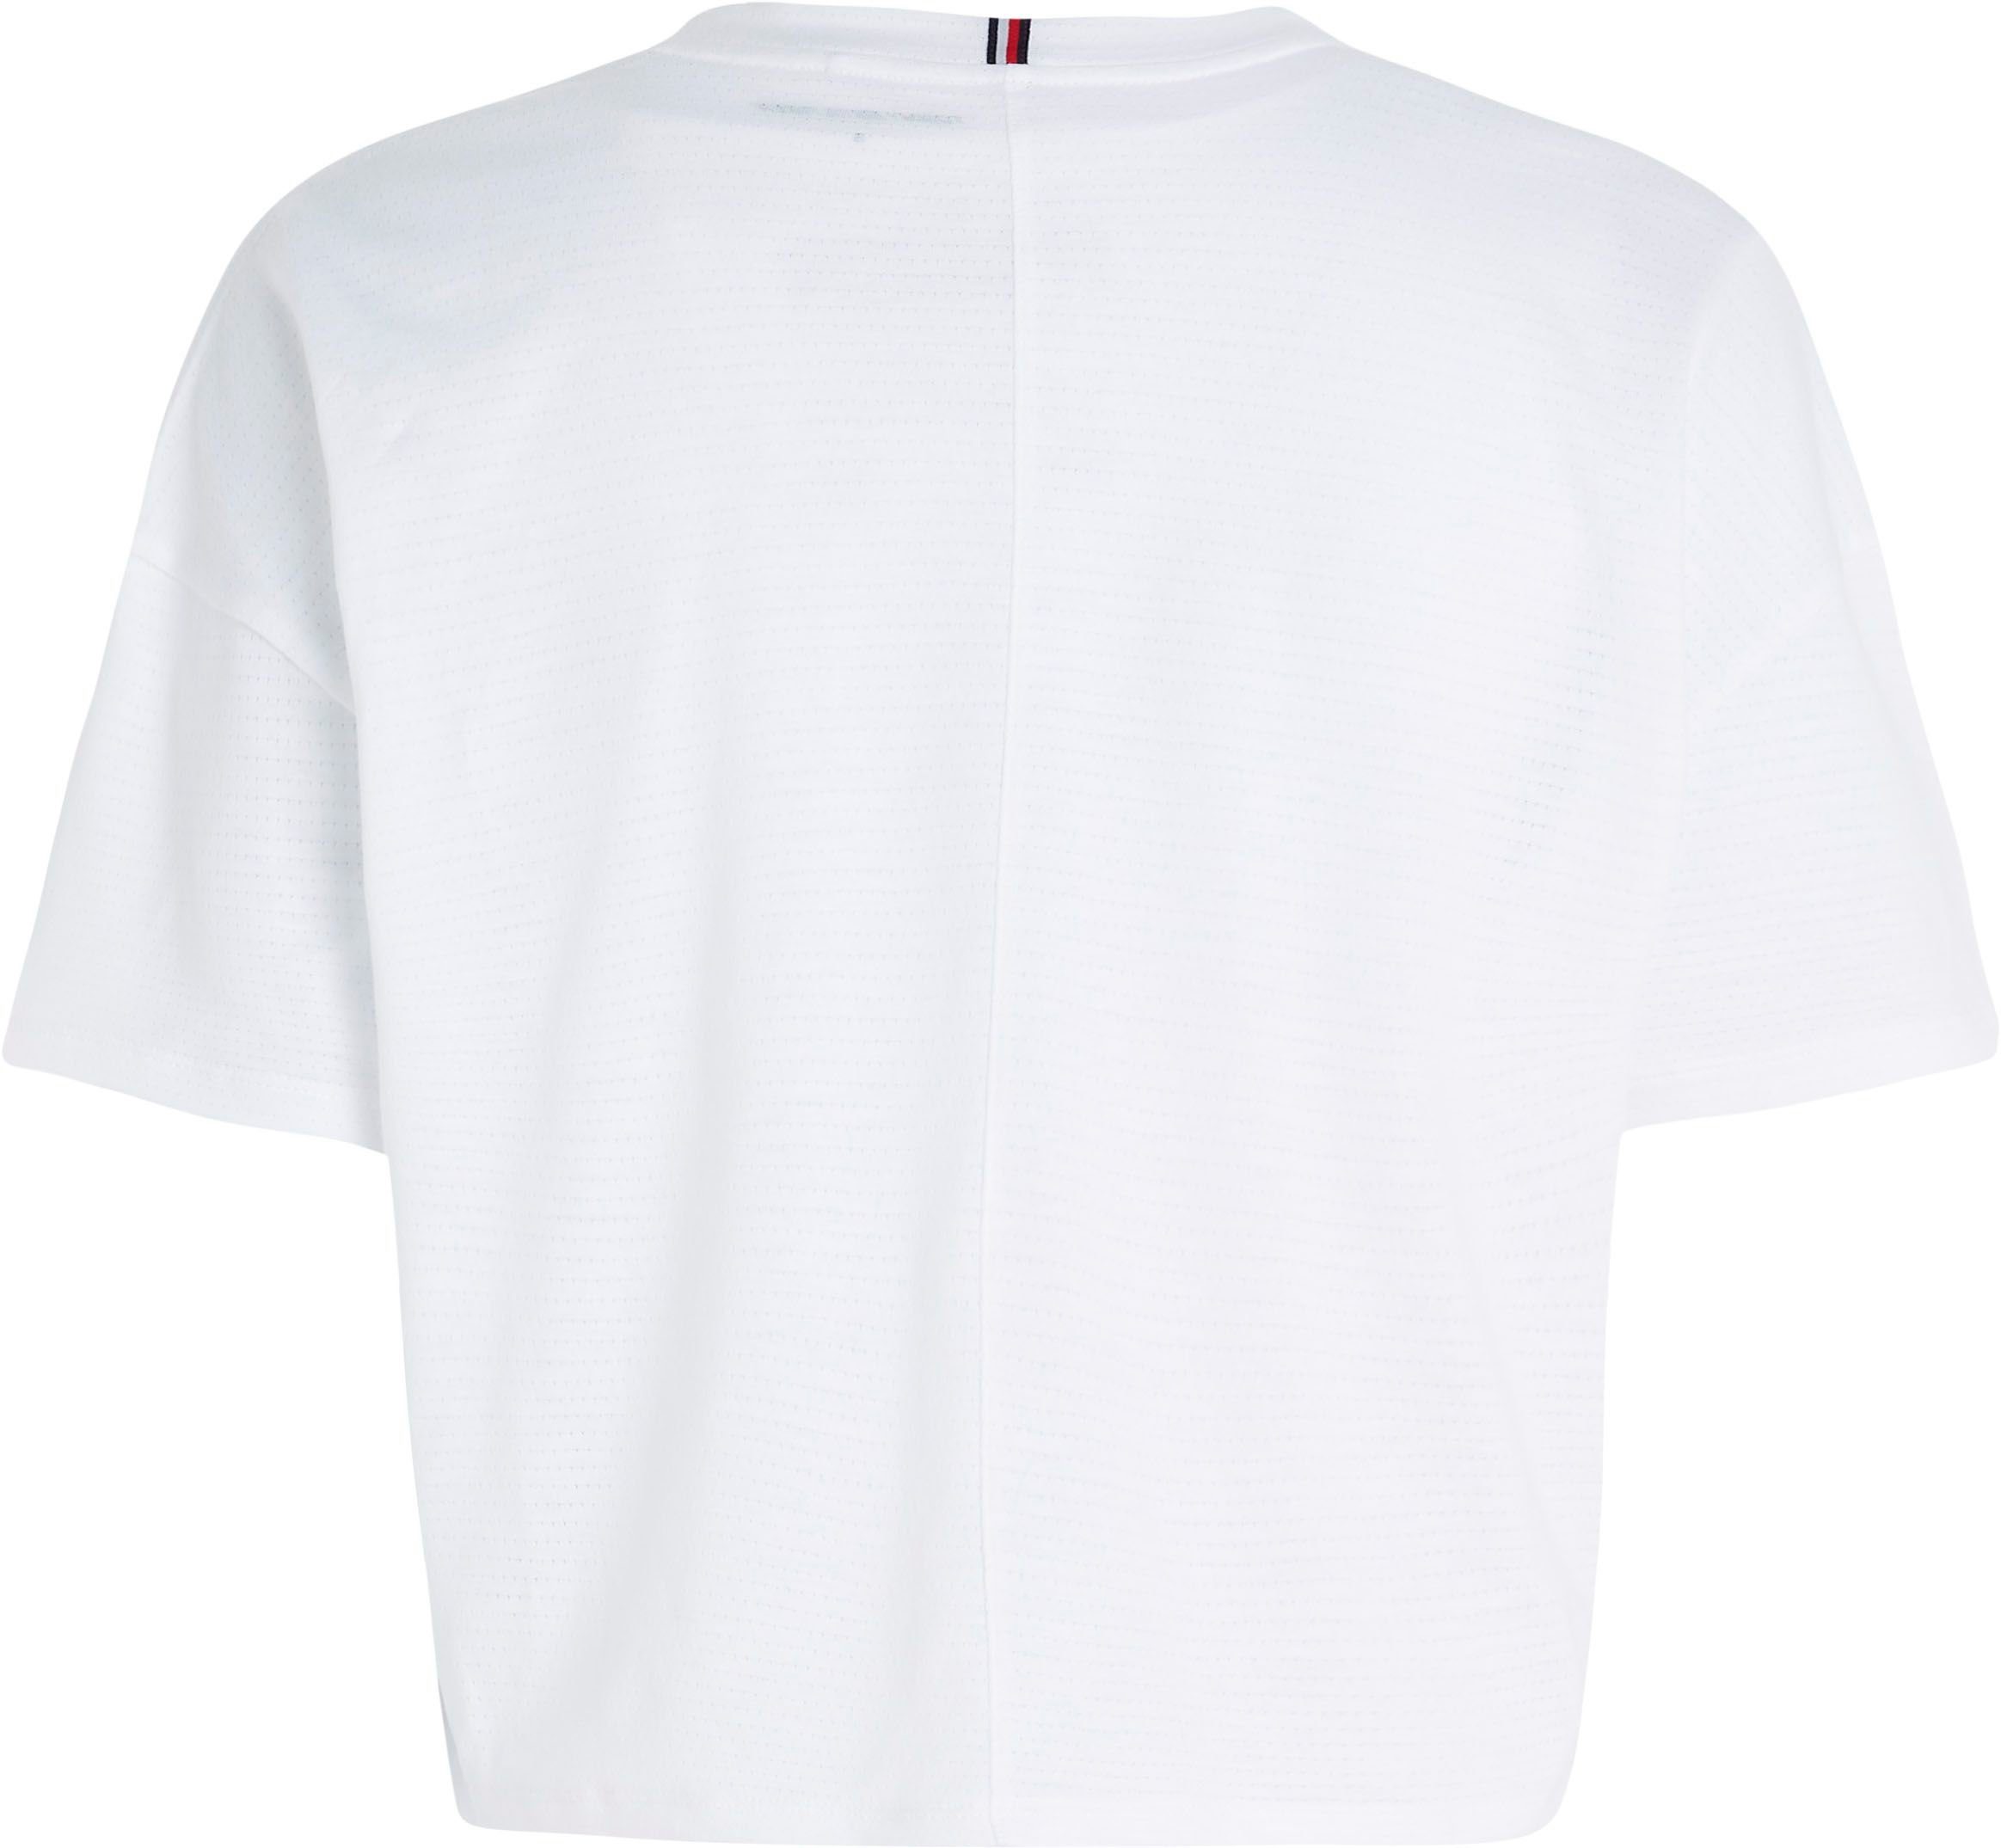 Sport Th-Optic-White Hilfiger TEE CROPPED in T-Shirt ESSENTIALS Tommy cropped RELAXED Form modischer